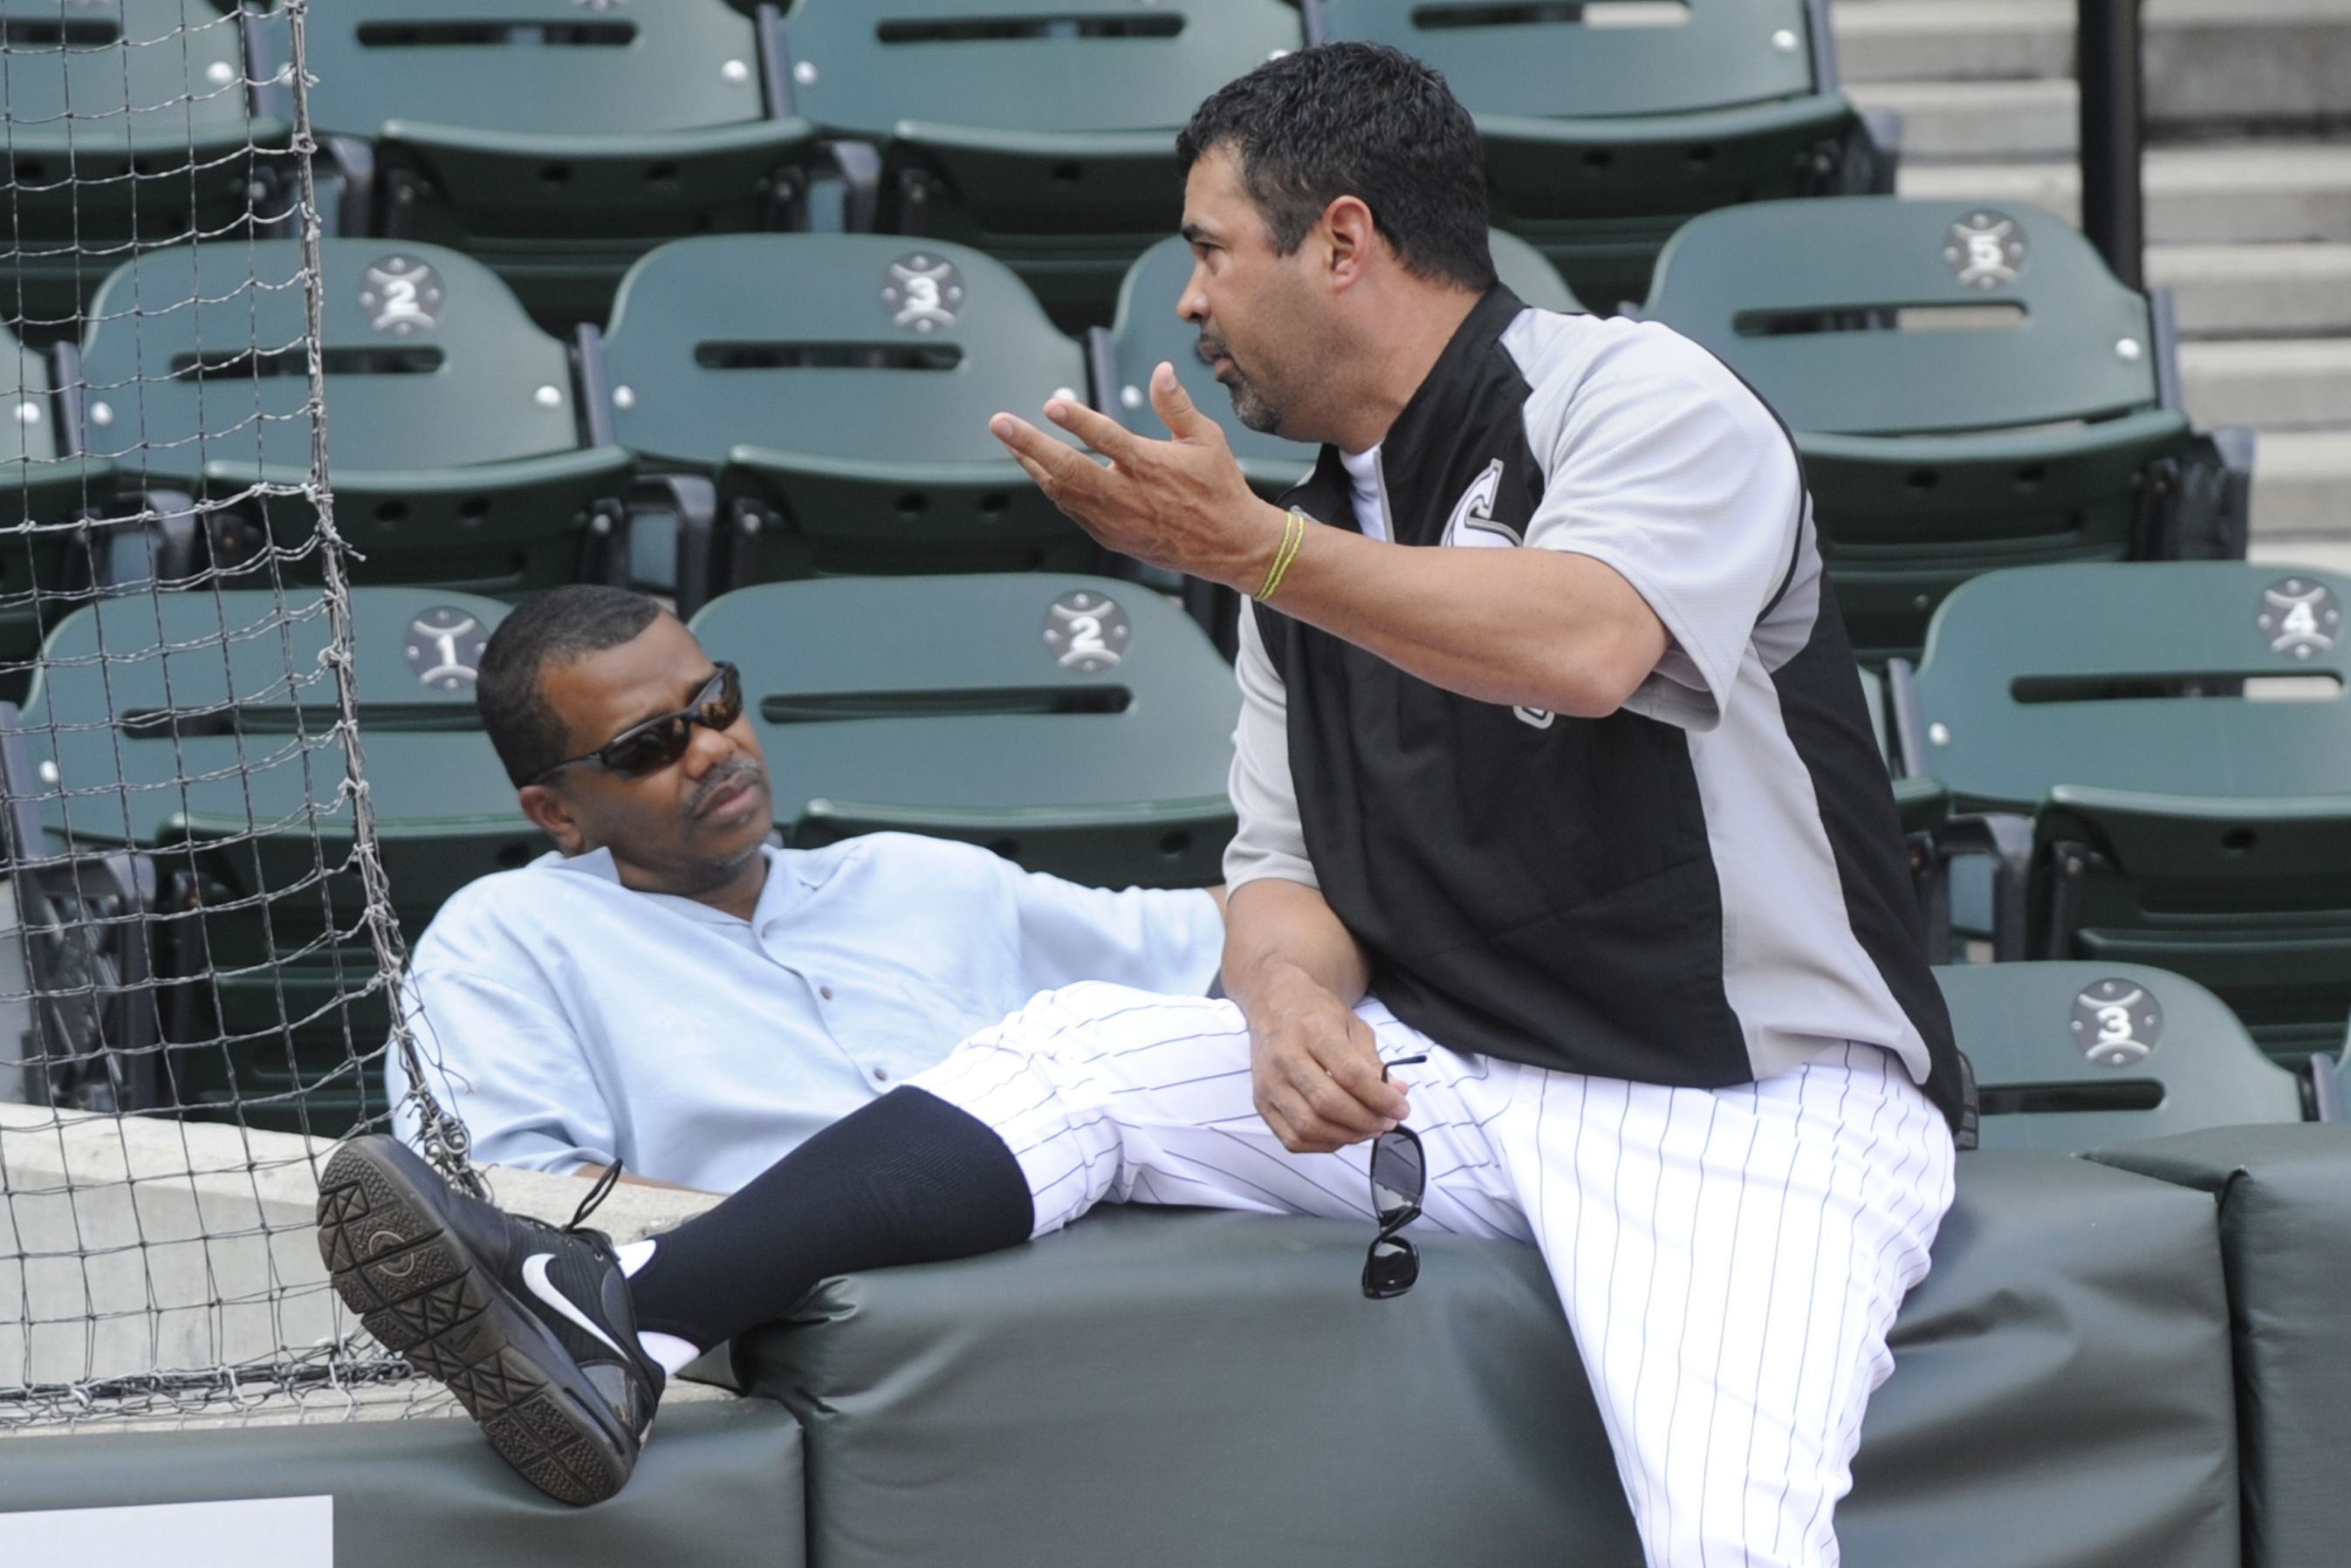 Ozzie Guillen fired from Marlins - South Side Sox